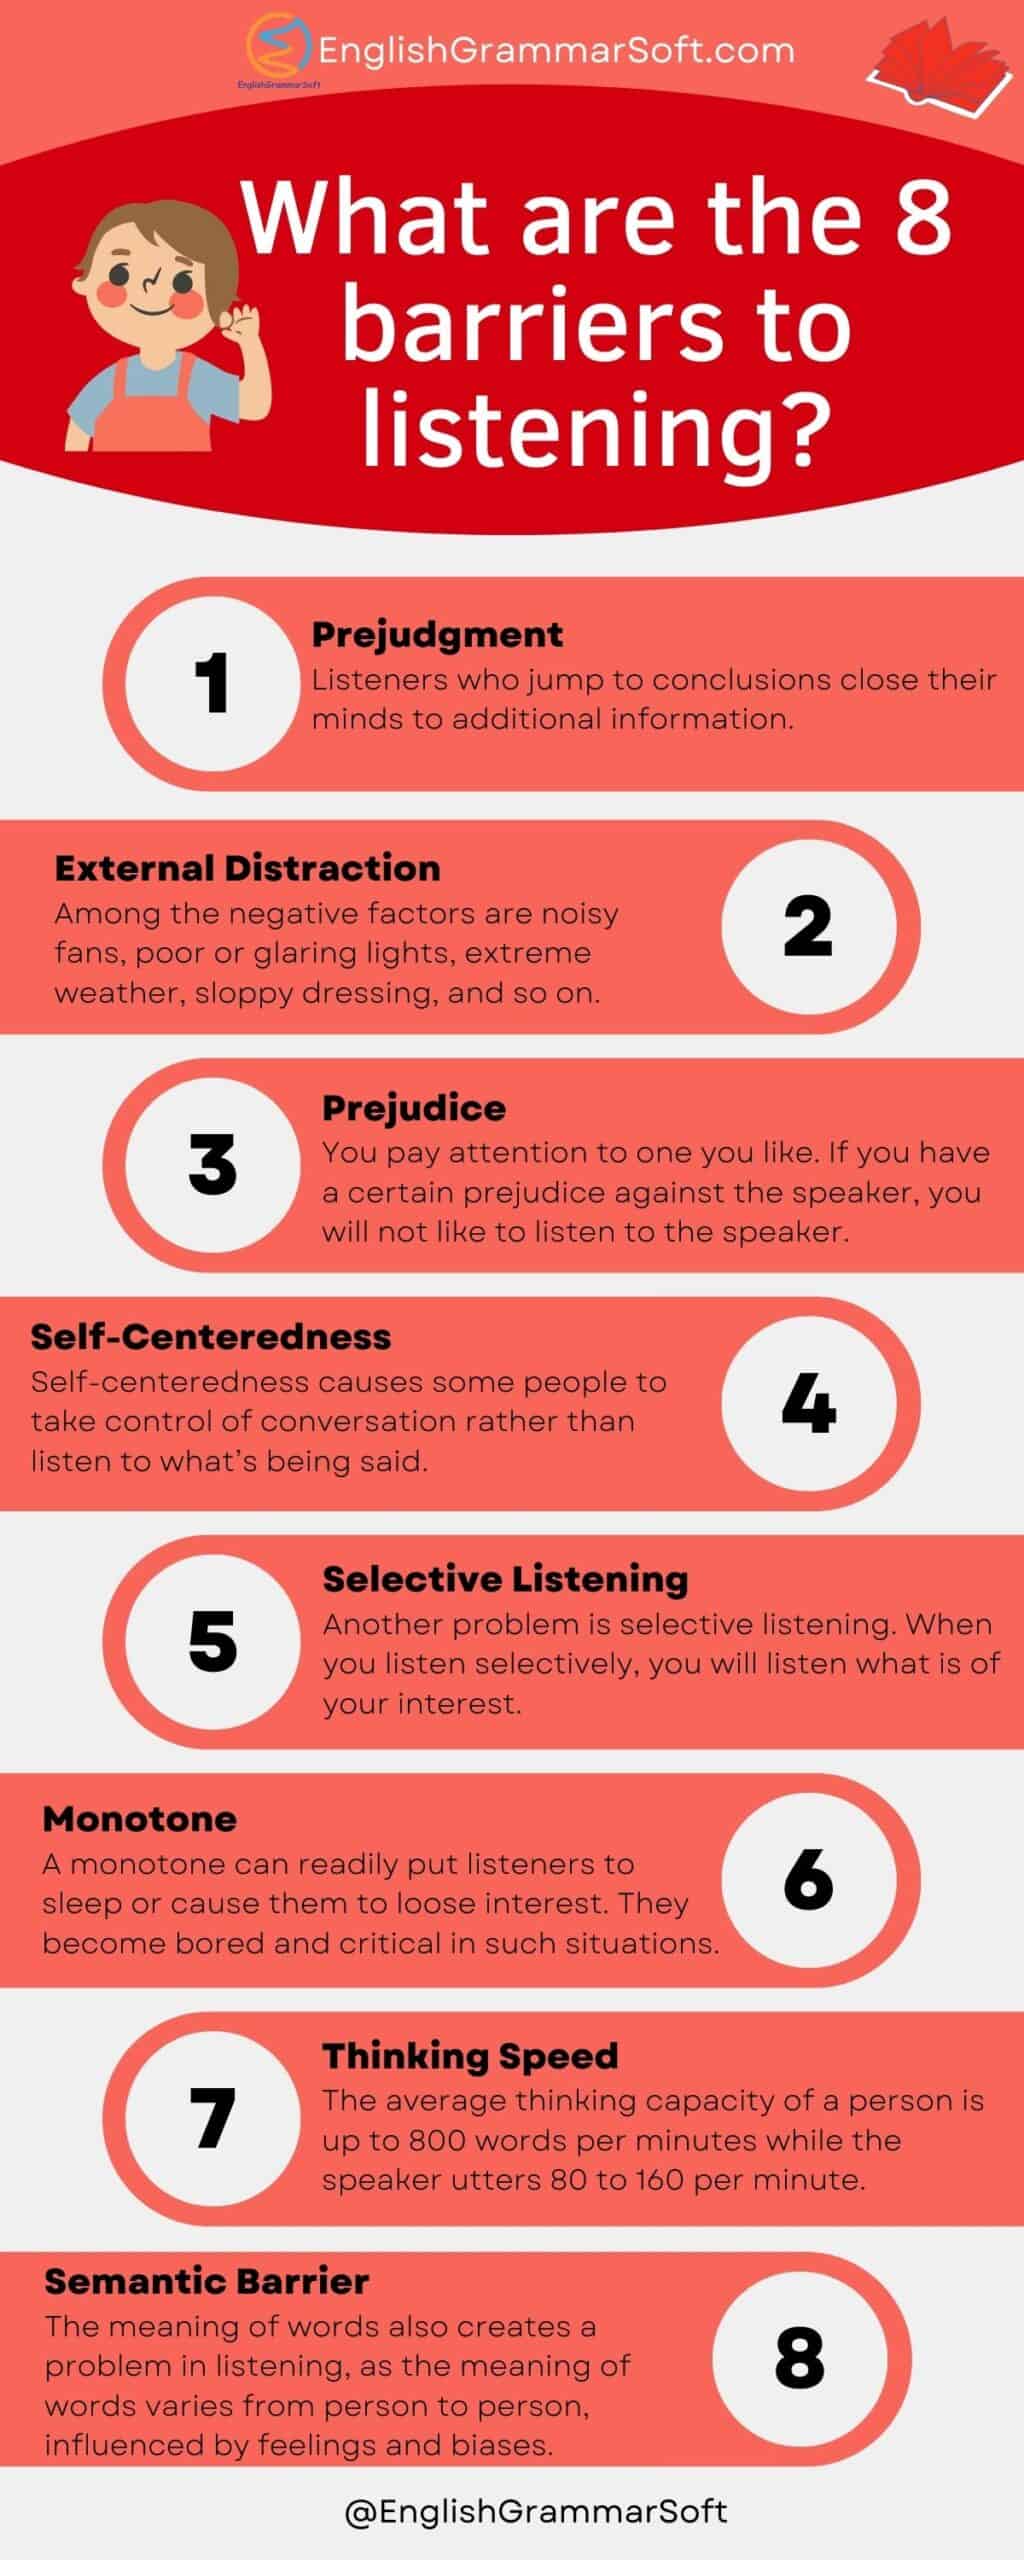 What are the 8 barriers to listening